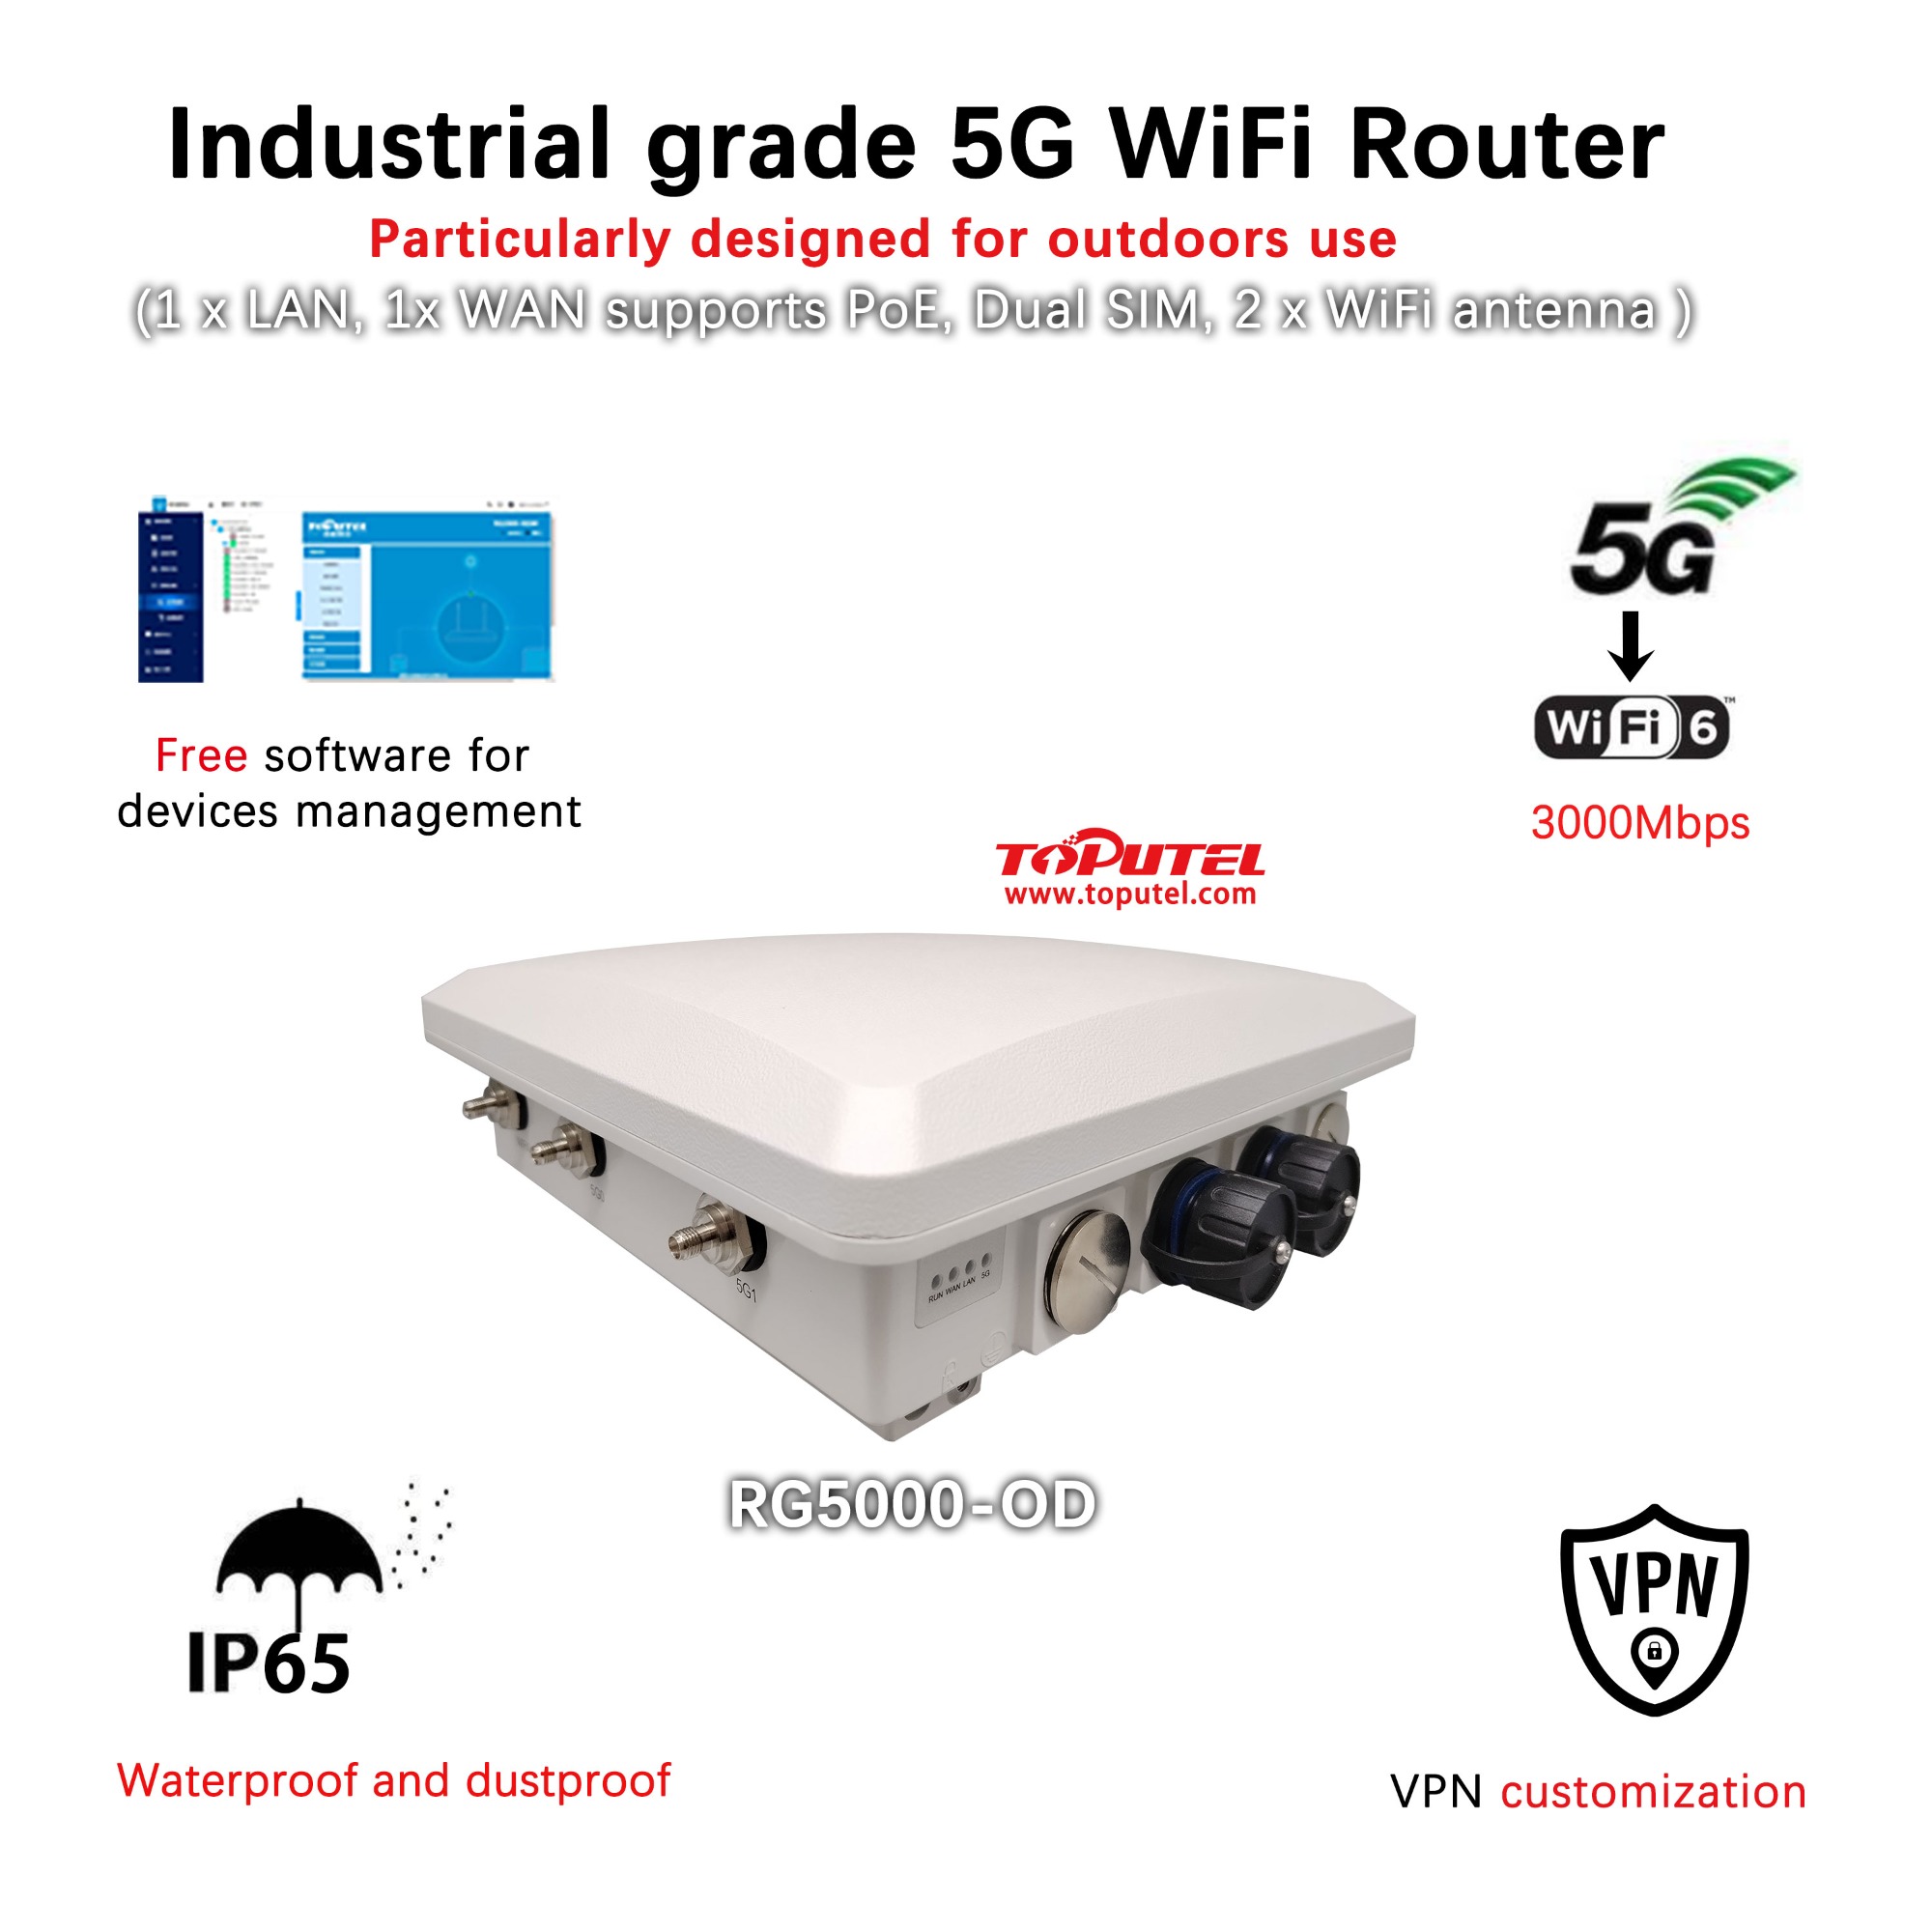 5G industrial router for outdoor use Dual SIM to WiFi6 waterproof IP65 VPN customization Free software for device management PoE